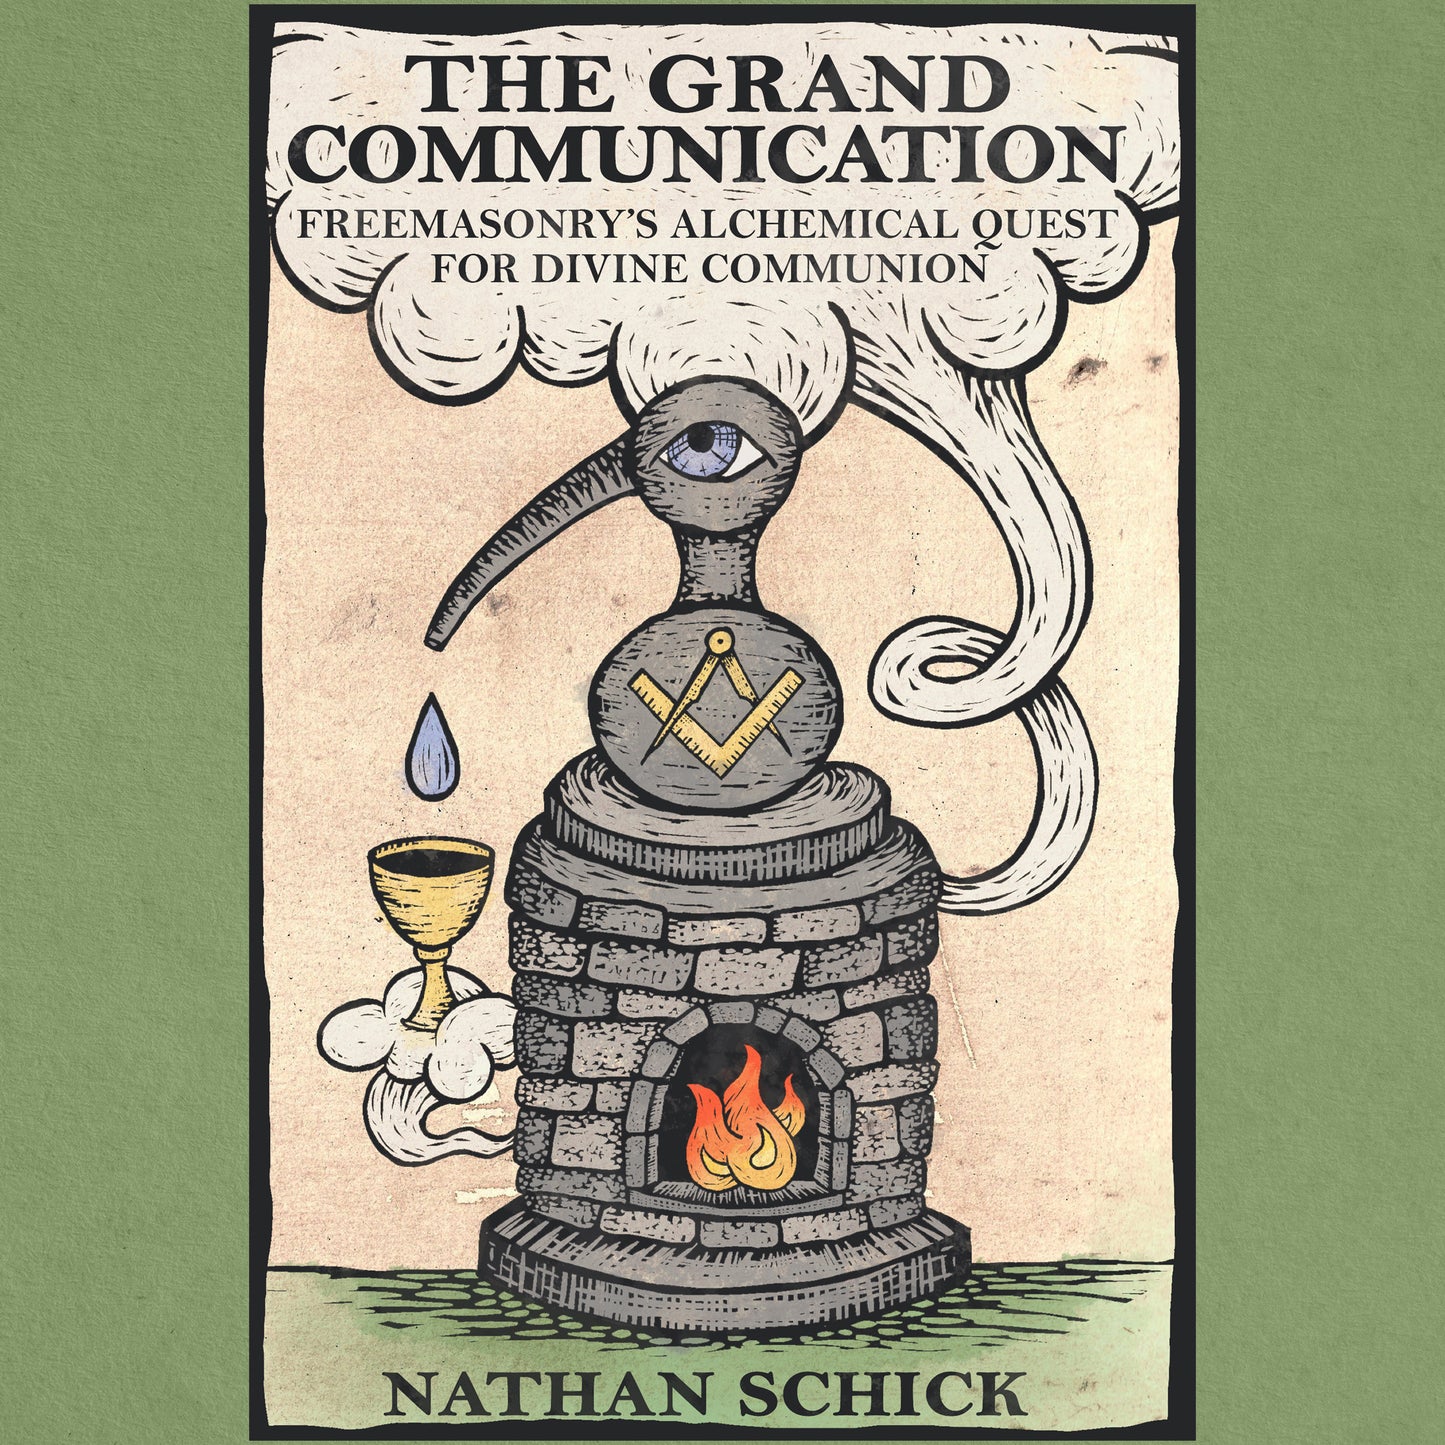 The Grand Communication by Nathan Schick